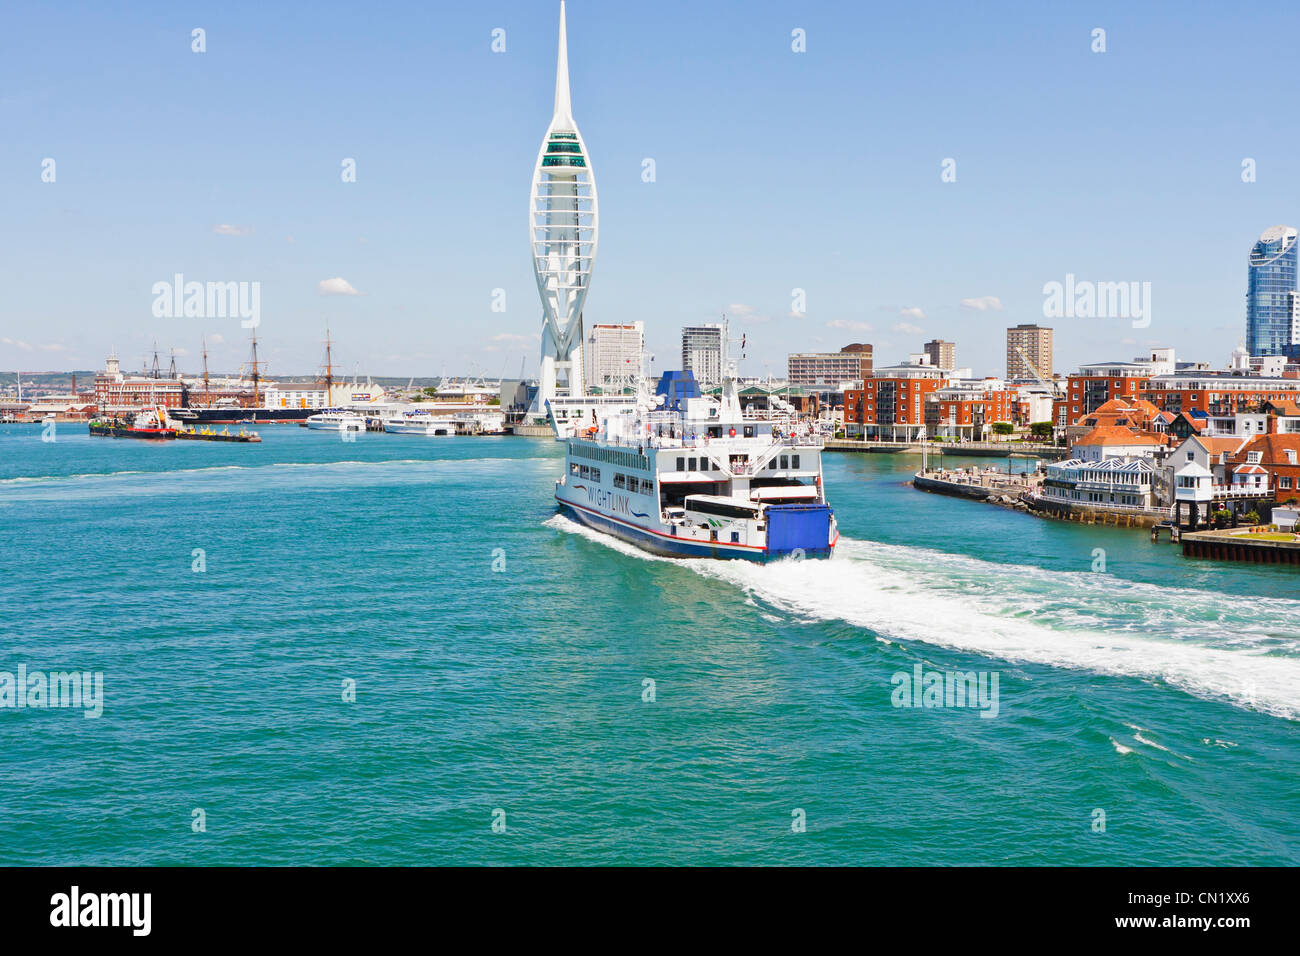 Isle of Wight ferry entering Portsmouth, UK harbour Stock Photo